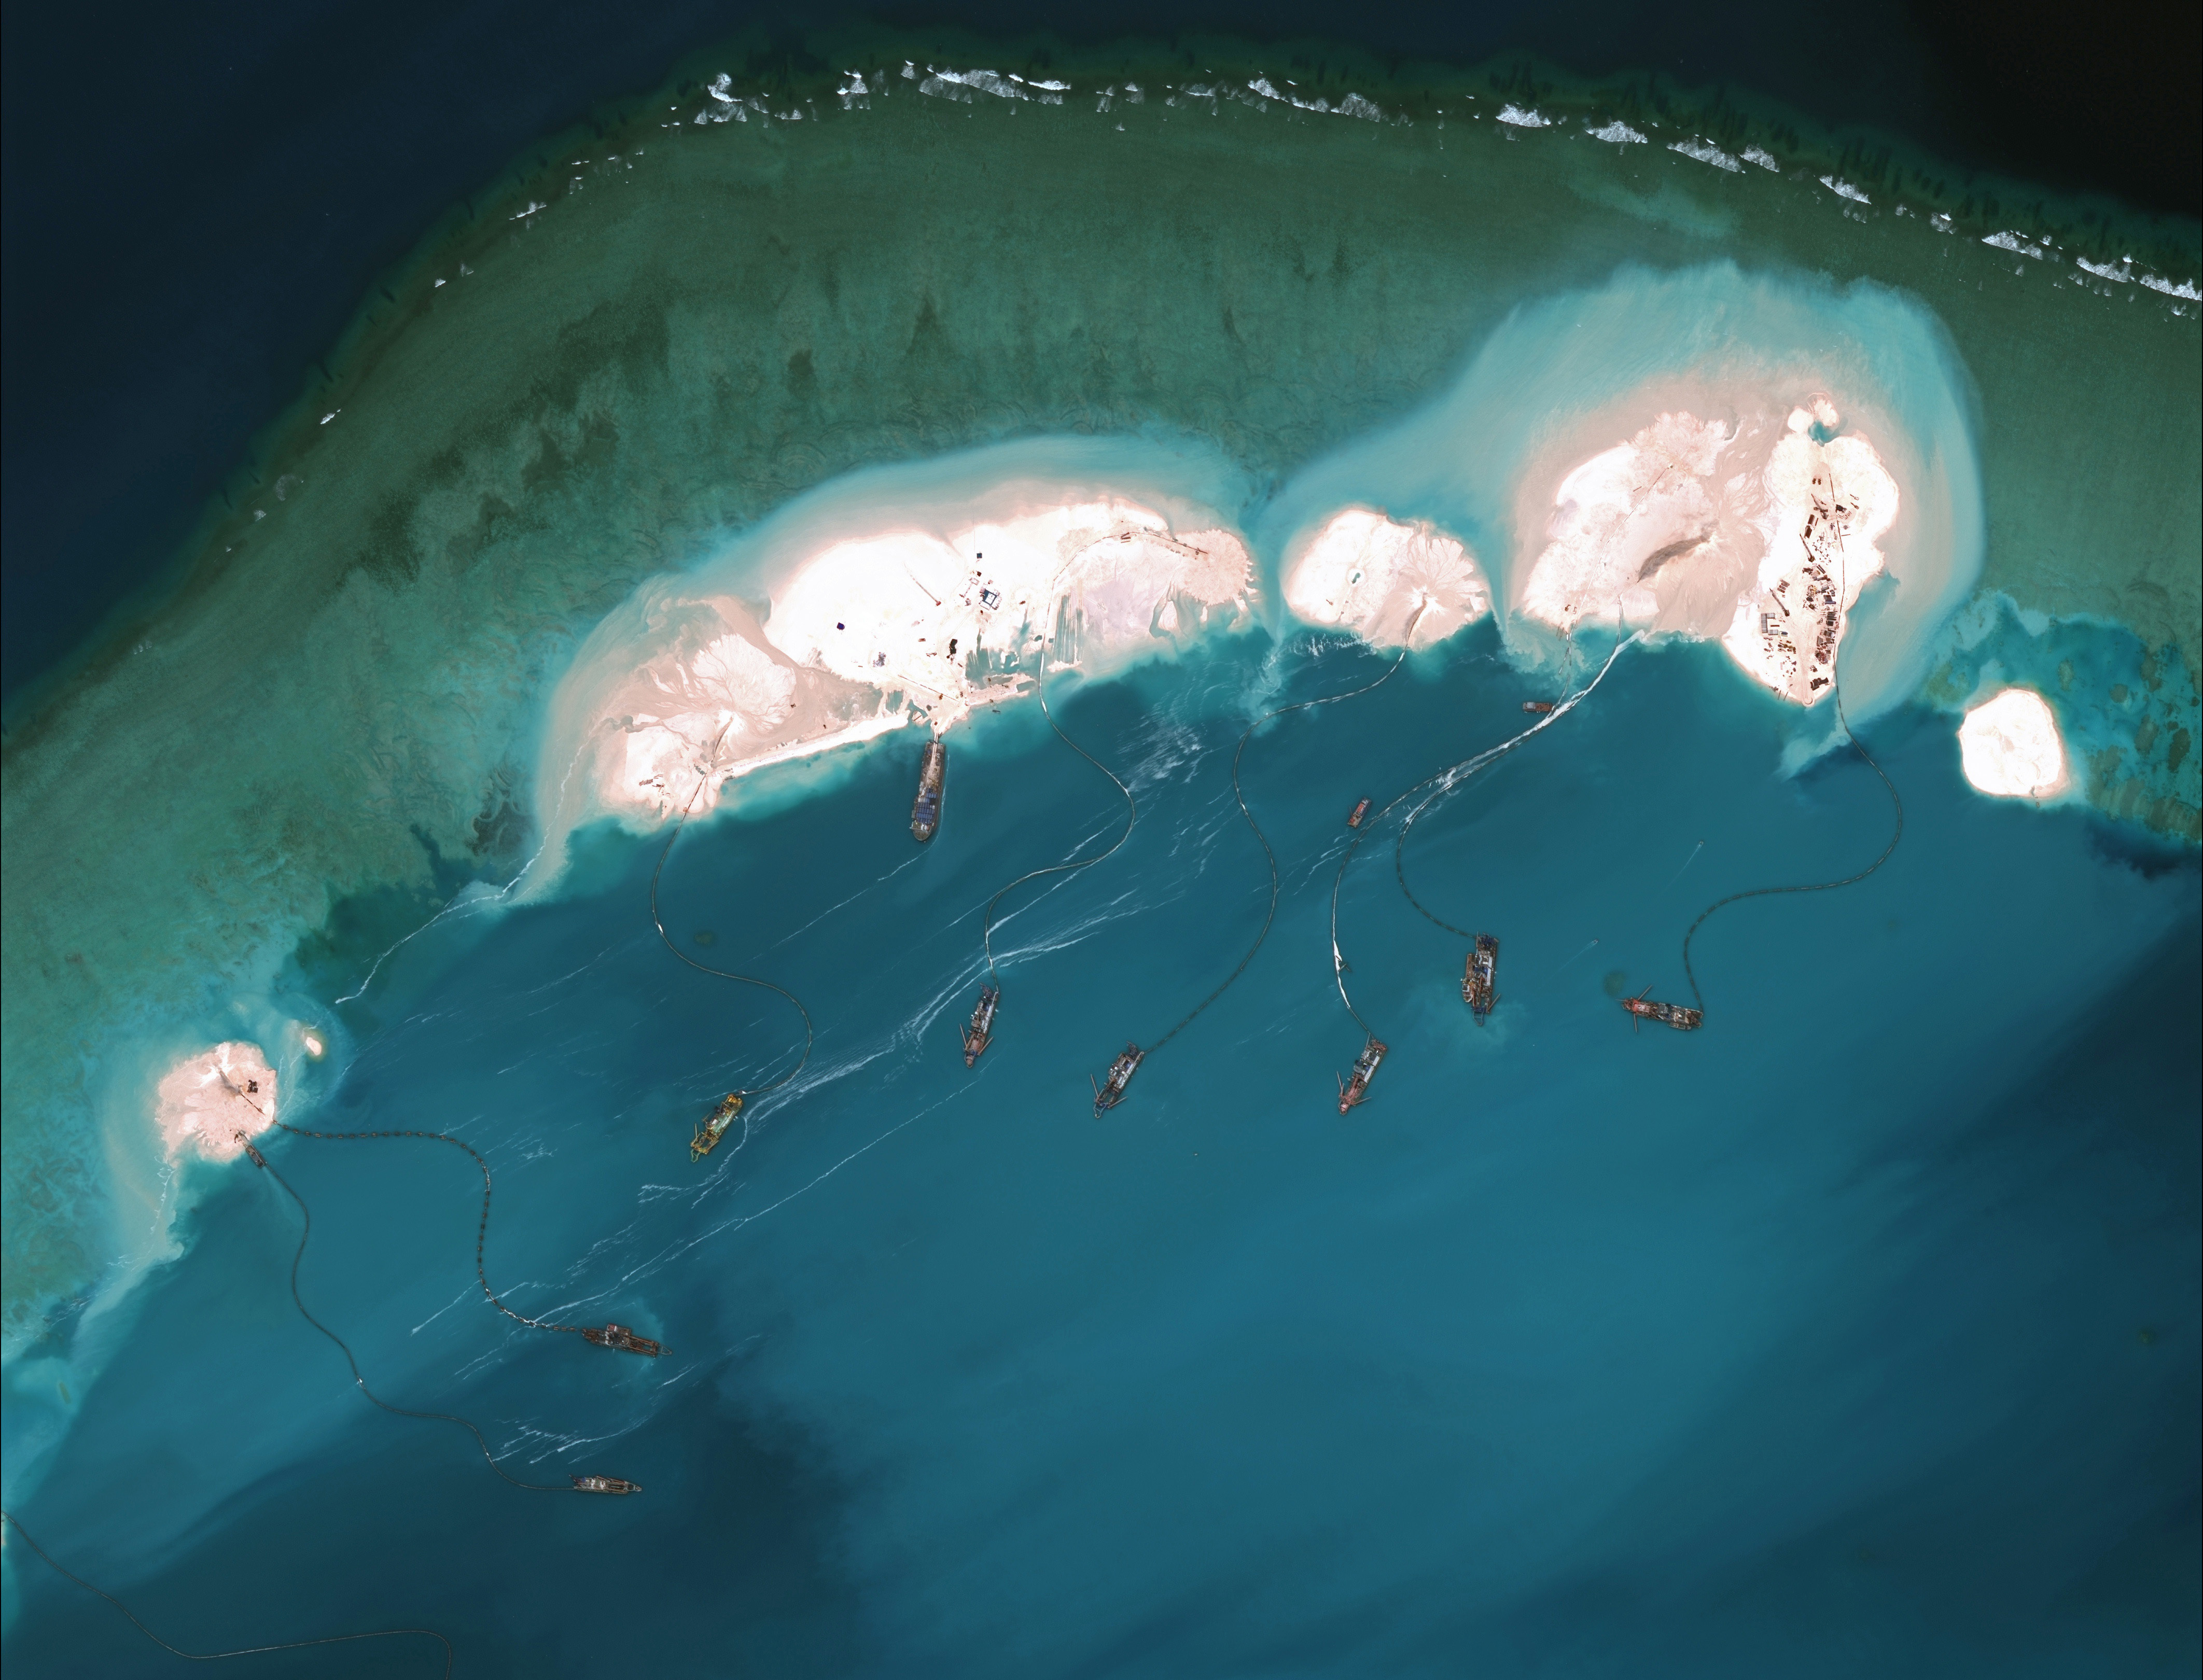 DigitalGlobe's imagery from March 16, 2015, shows significant construction and dredging under way at Mischief Reef. New structures, fortified seawalls, and construction equipment are present at multiple sites (DigitalGlobe/ScapeWare3d—DigitalGlobe/Getty Images)